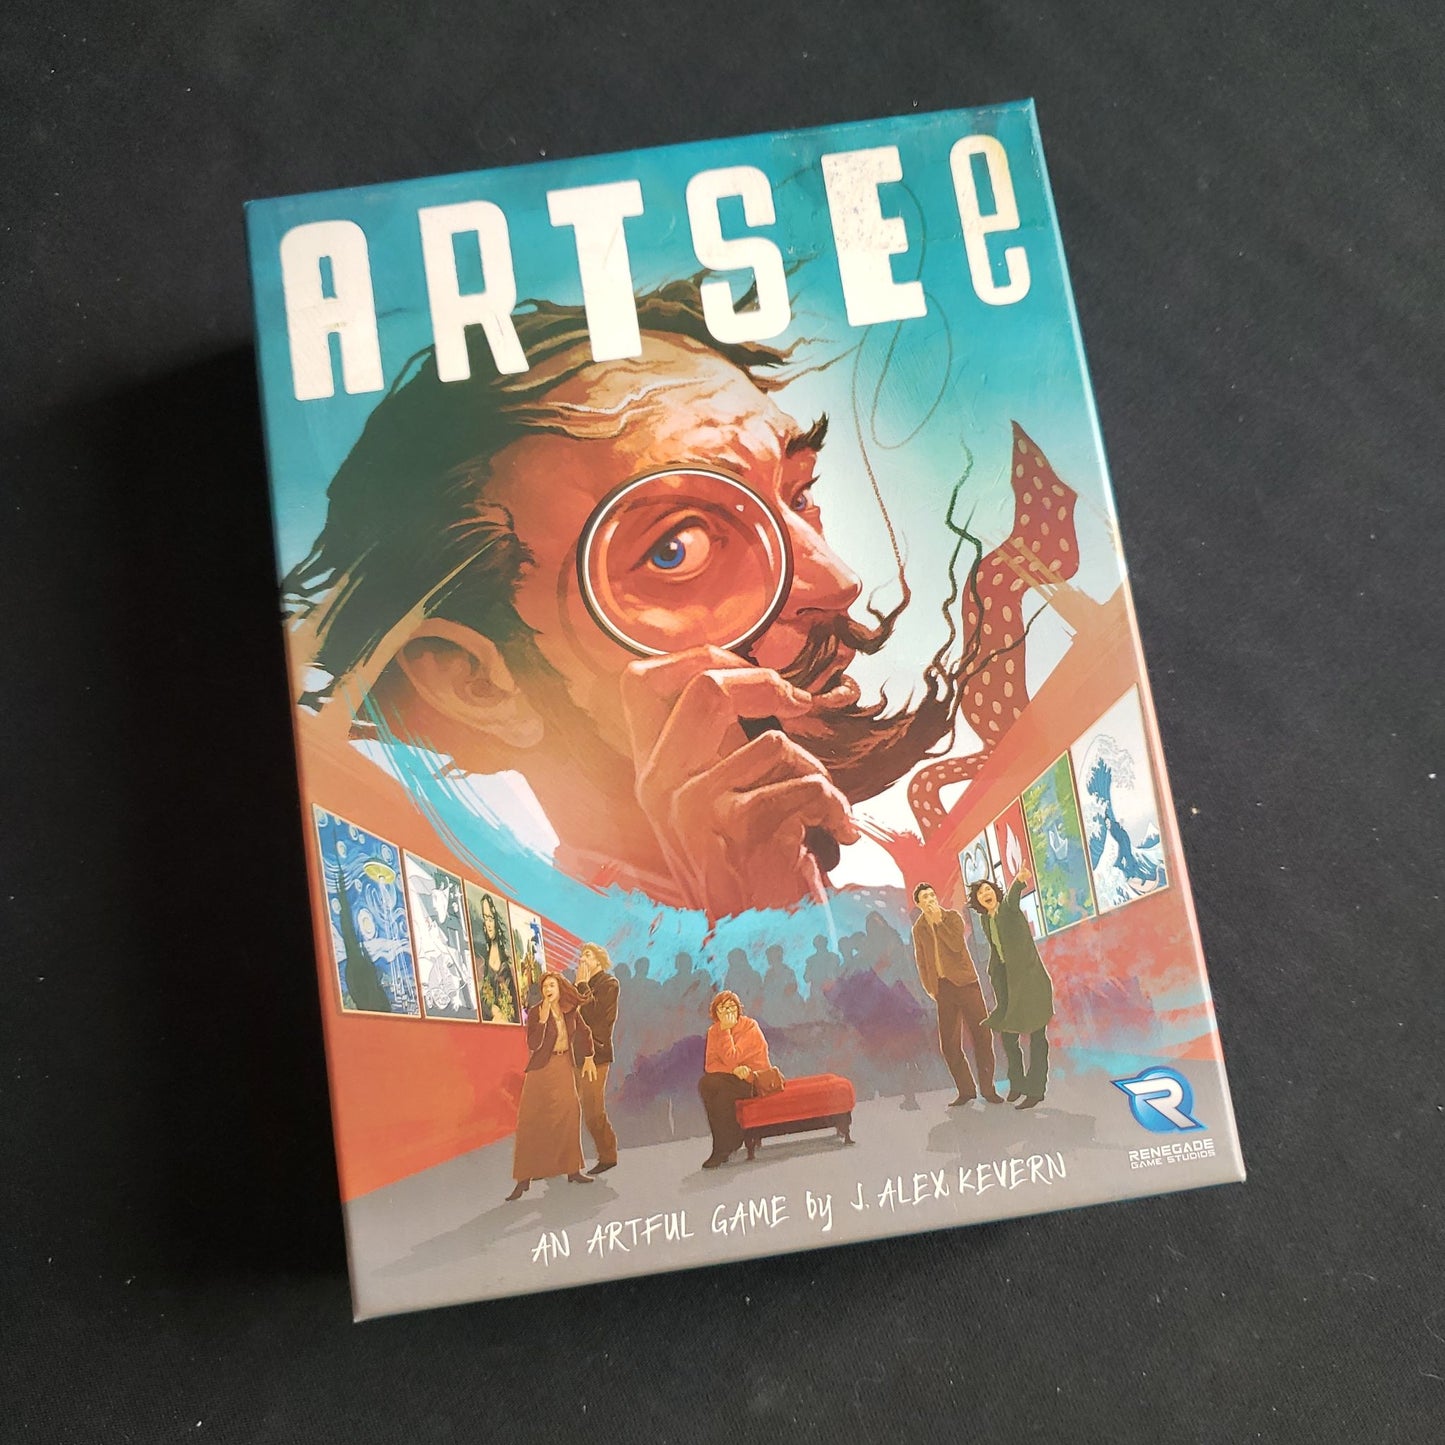 Image shows the front cover of the box of the ArtSee card game